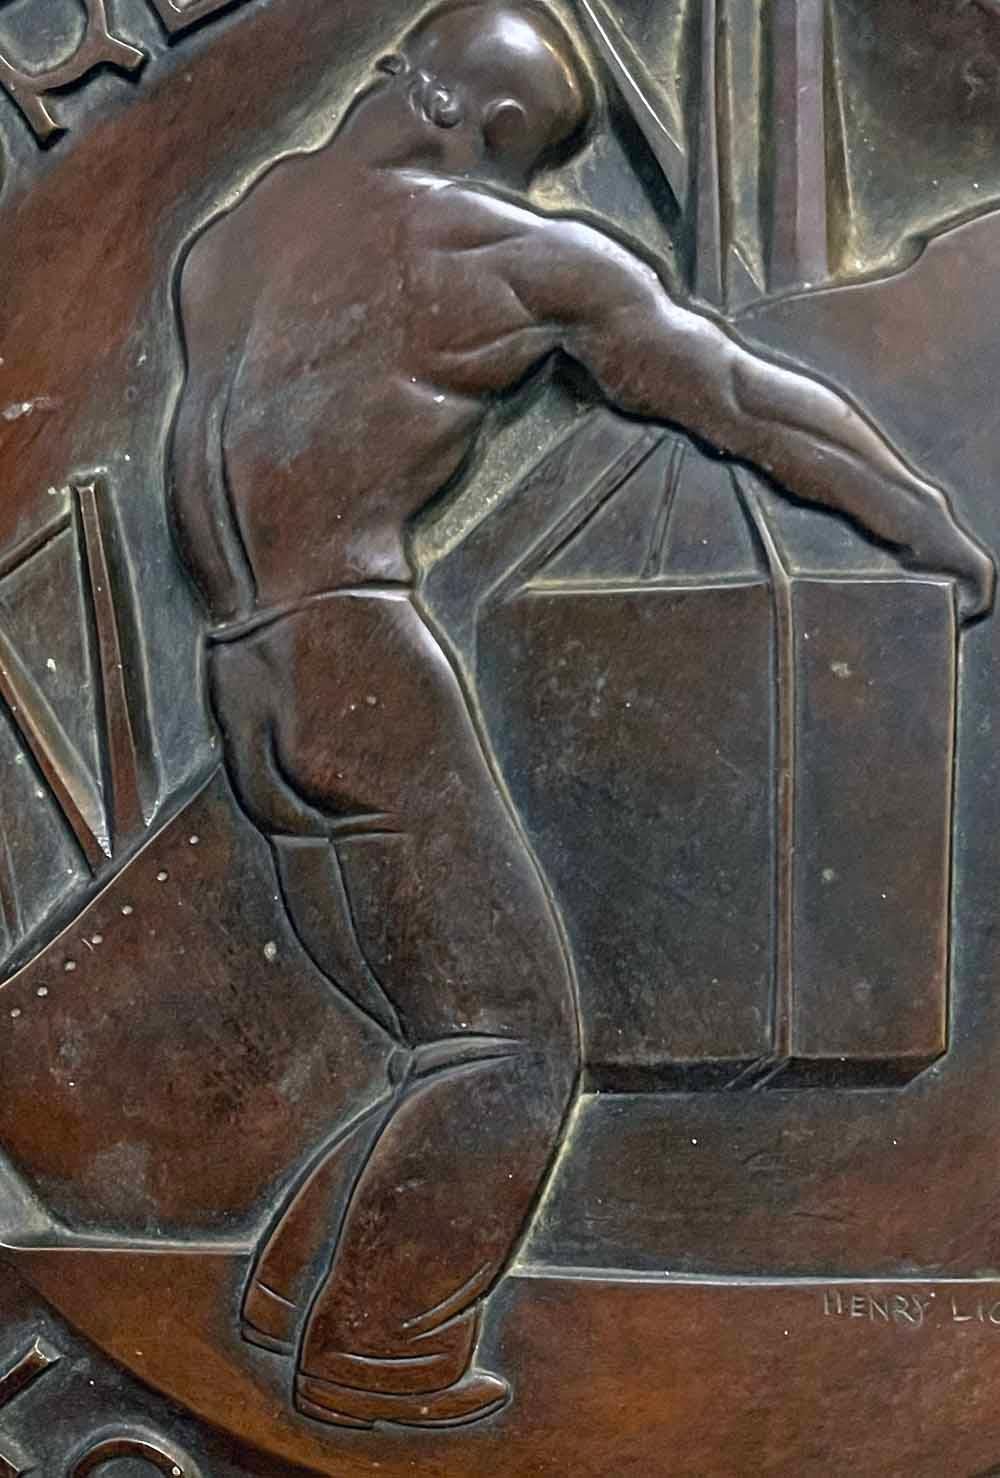 A superb and unique example of the Art Deco sculpture of Henry Lion -- who created some of Los Angeles' most important public works in the heyday of its growth in the 1920s and 30s -- this bronze rondel depicts a shirtless stevedore maneuvering a